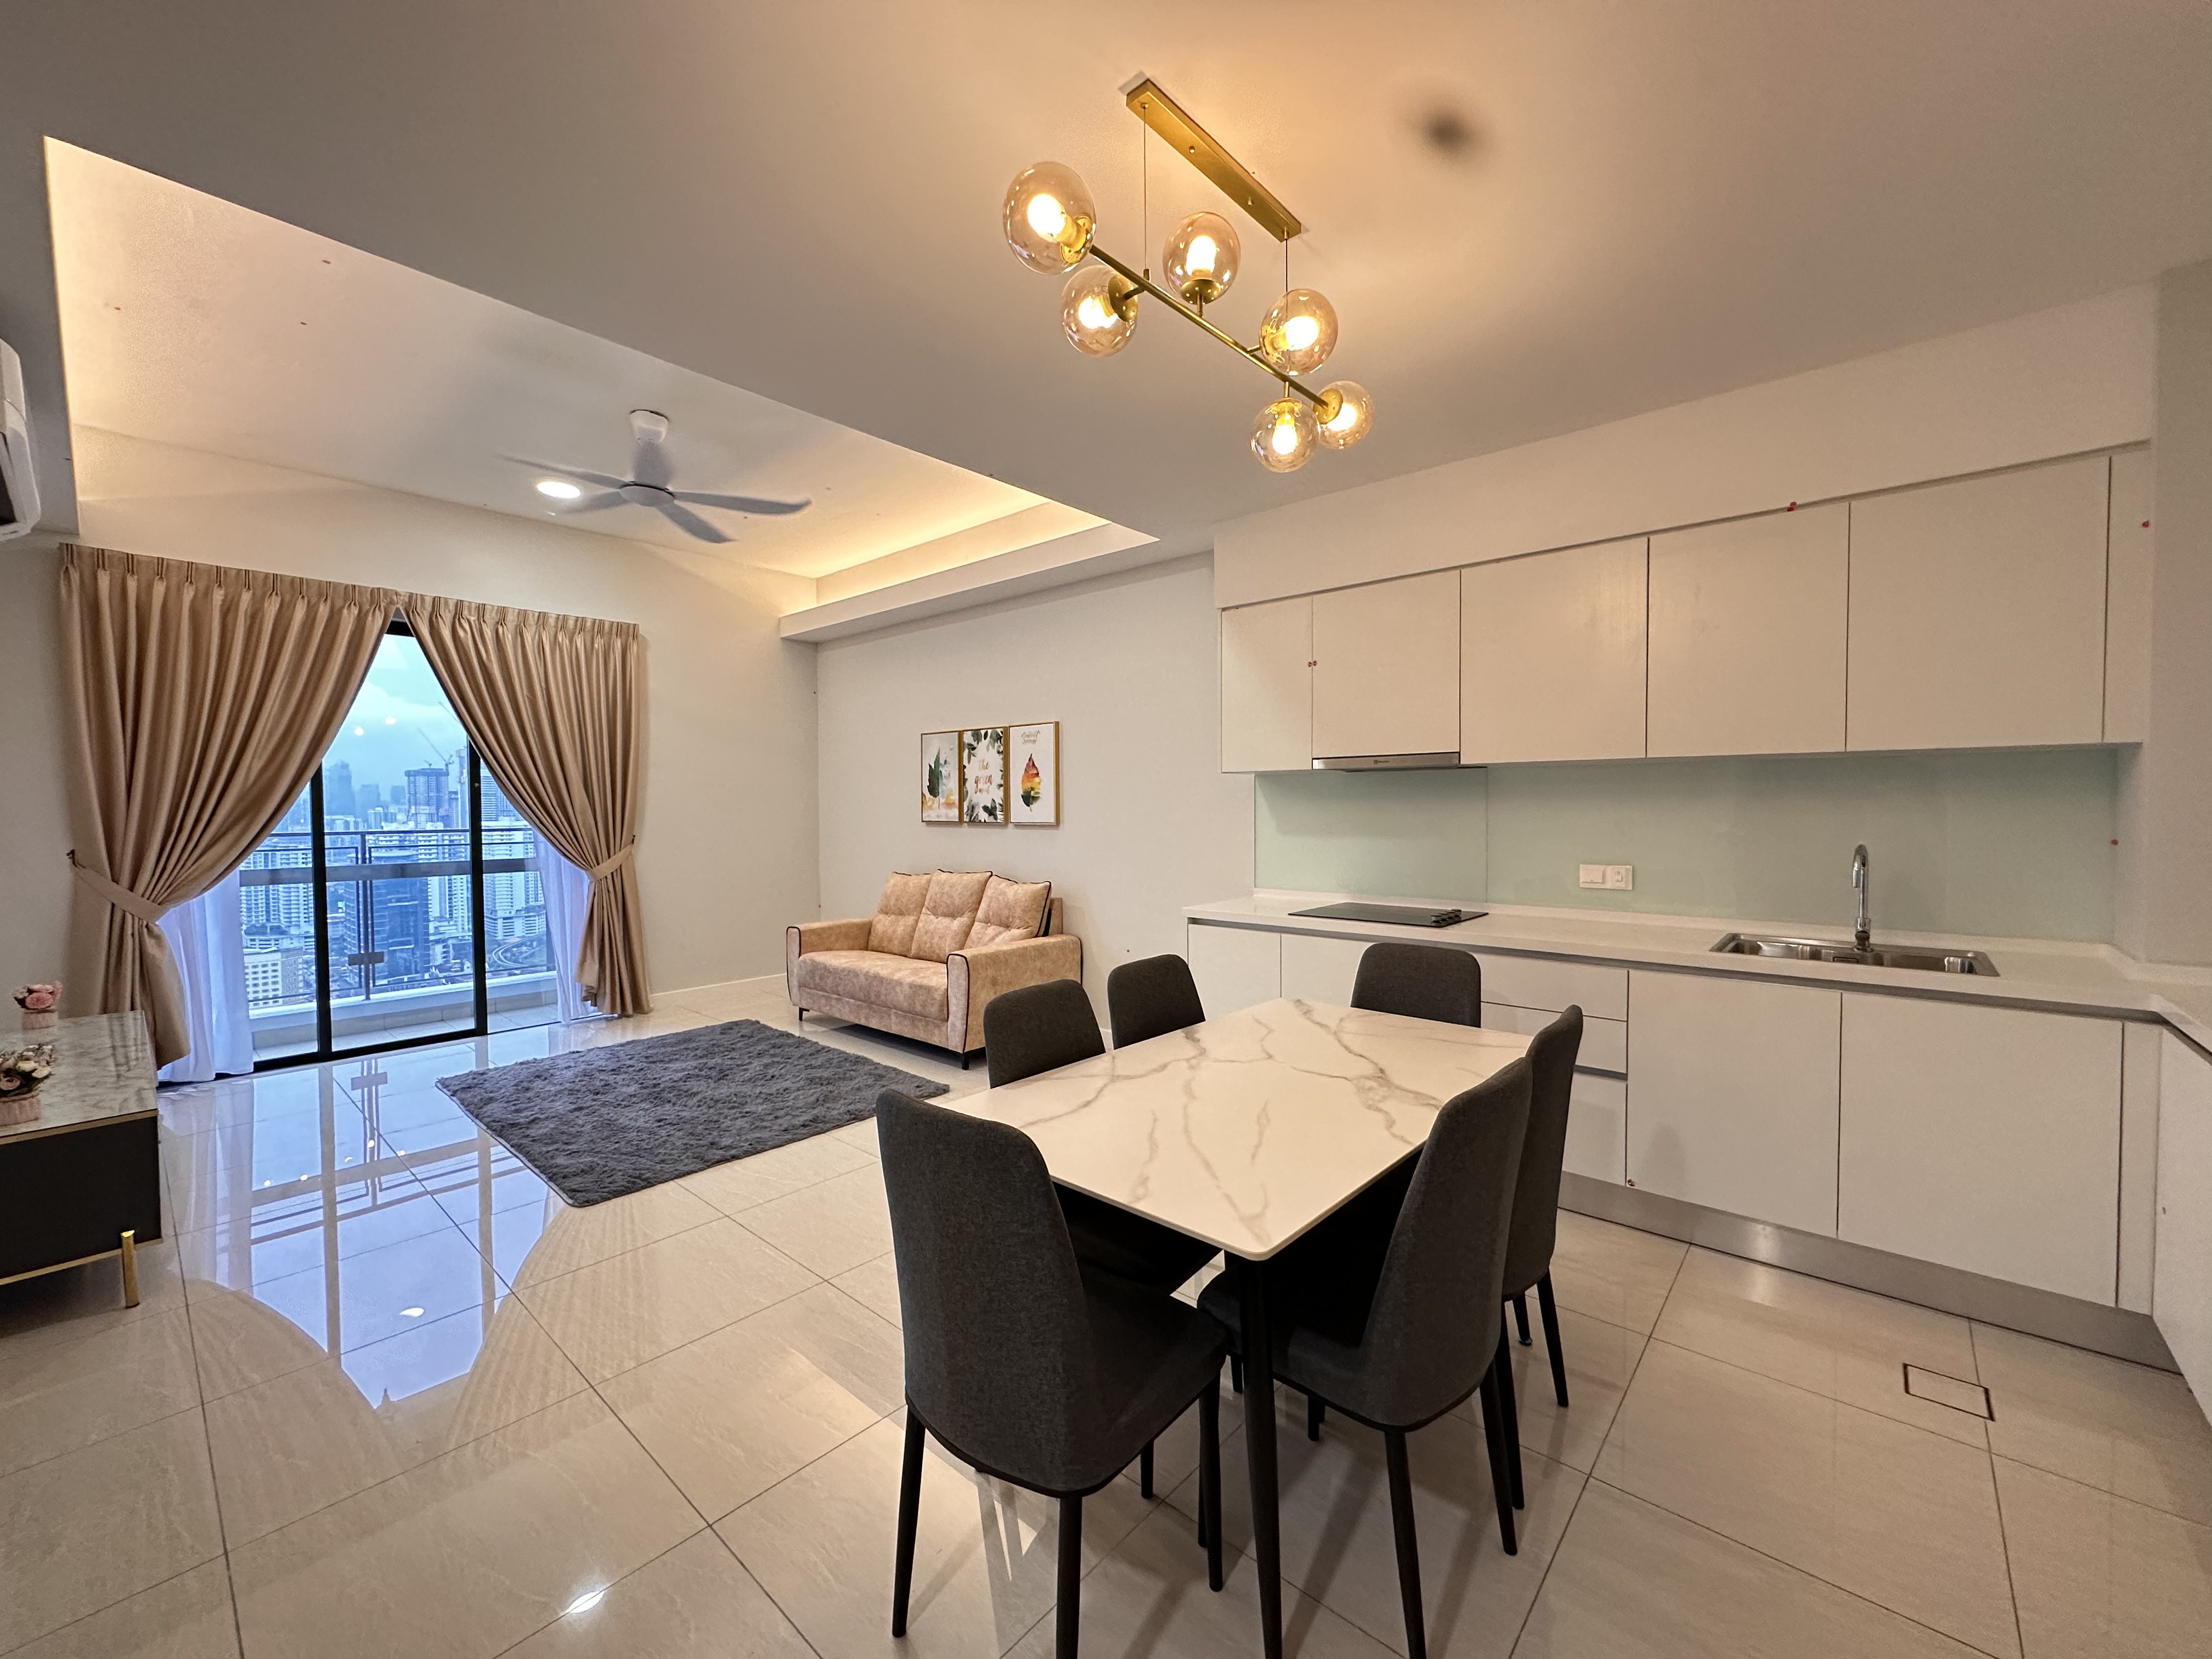 Unit with balcony. Superb KL City view